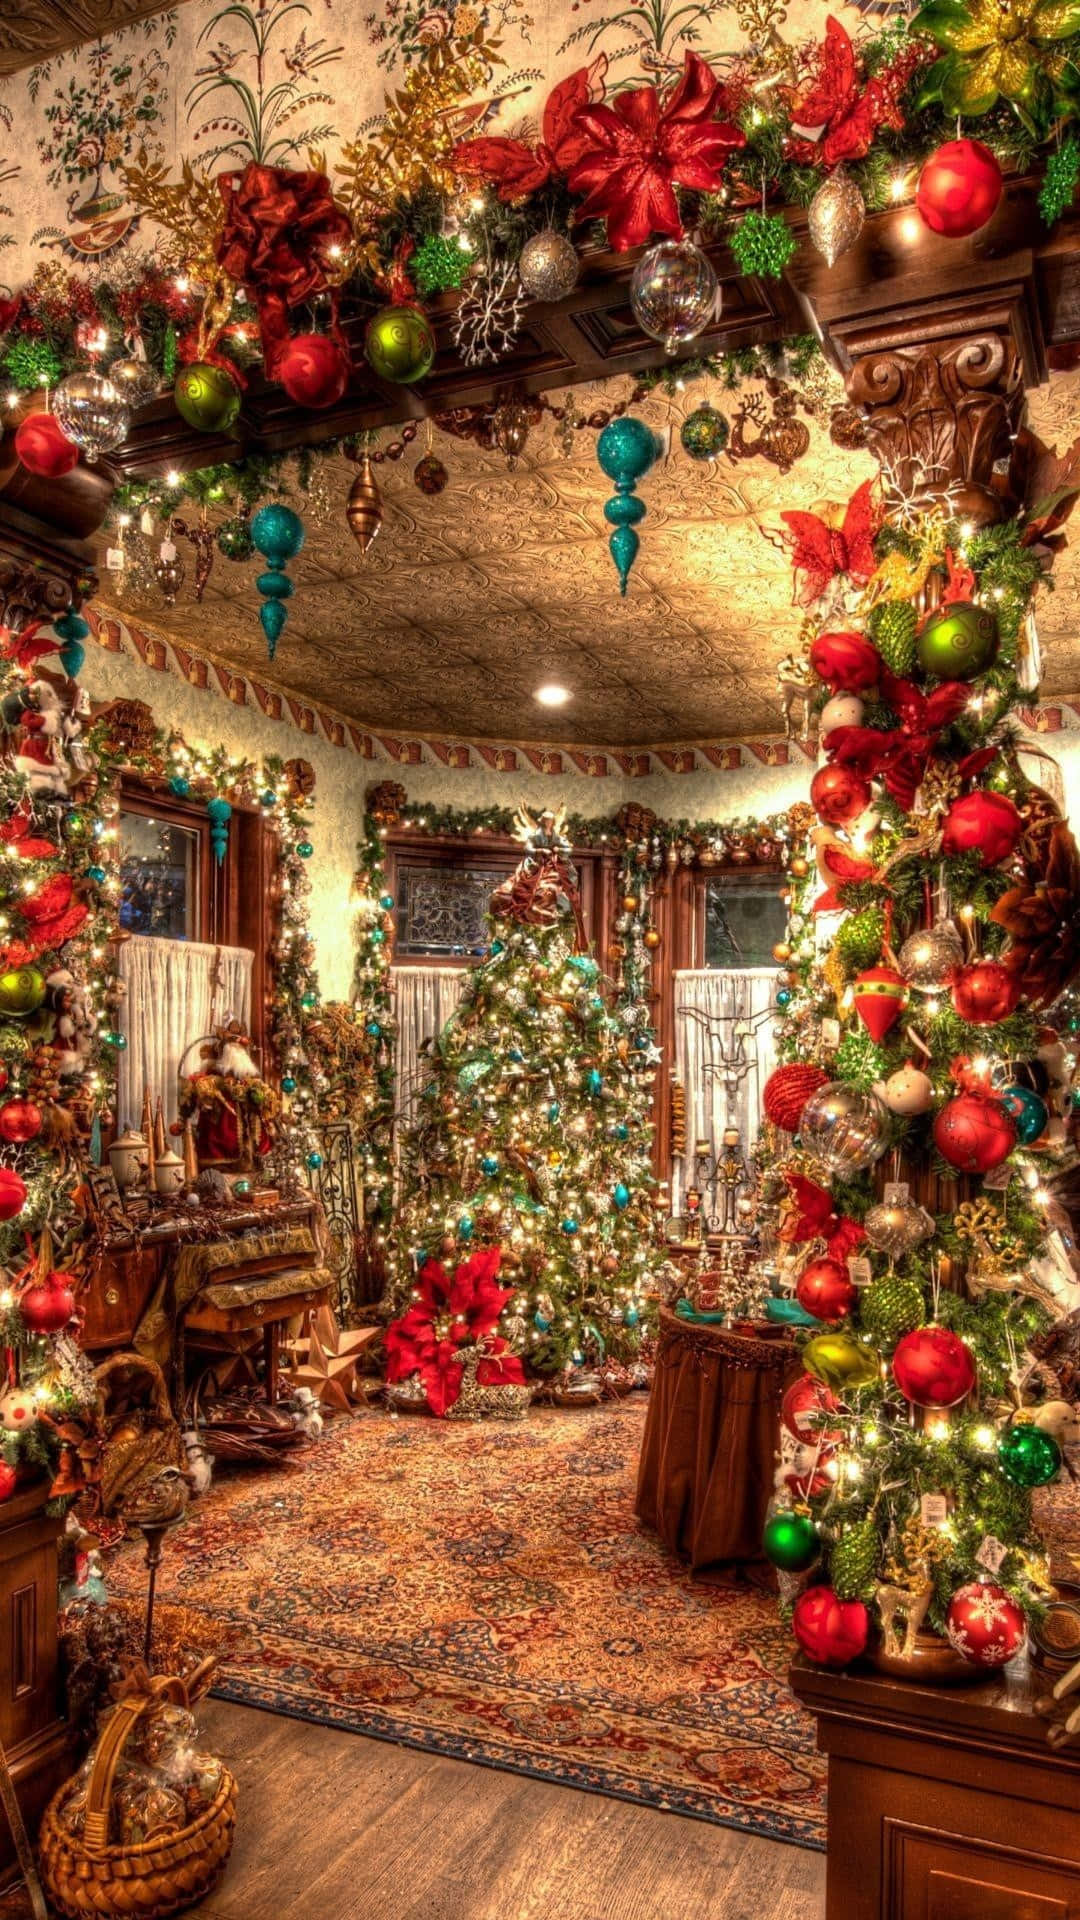 A Christmas Room Decorated With Ornaments And Decorations Wallpaper